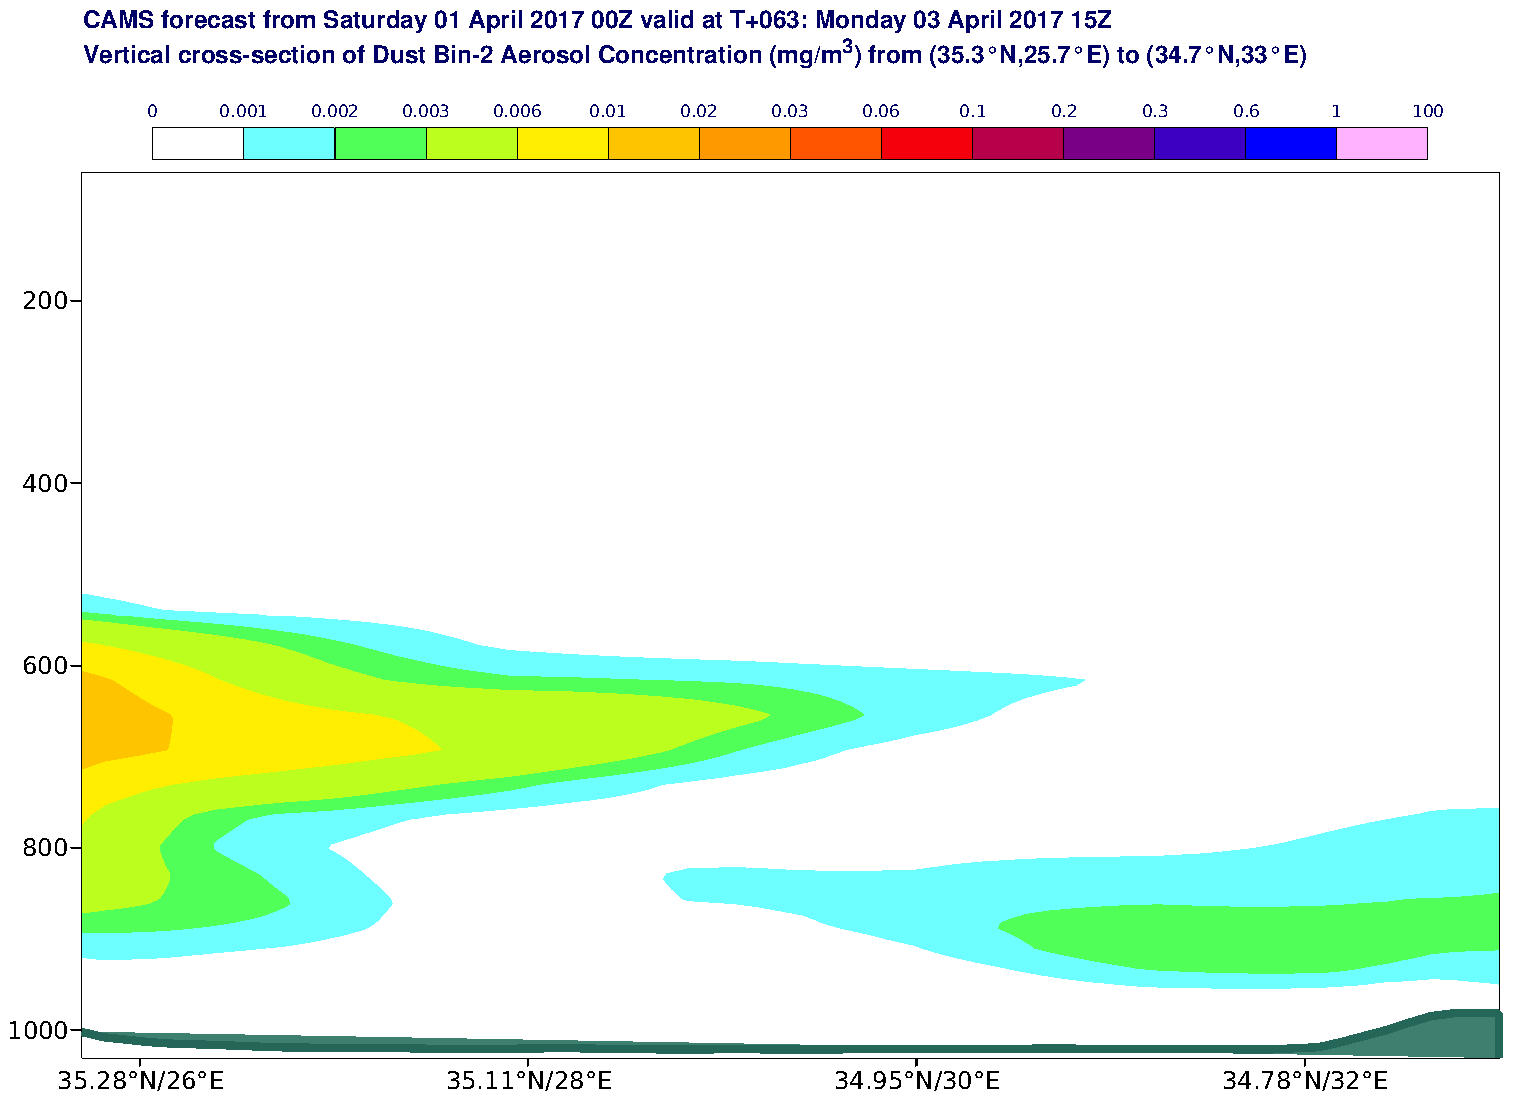 Vertical cross-section of Dust Bin-2 Aerosol Concentration (mg/m3) valid at T63 - 2017-04-03 15:00